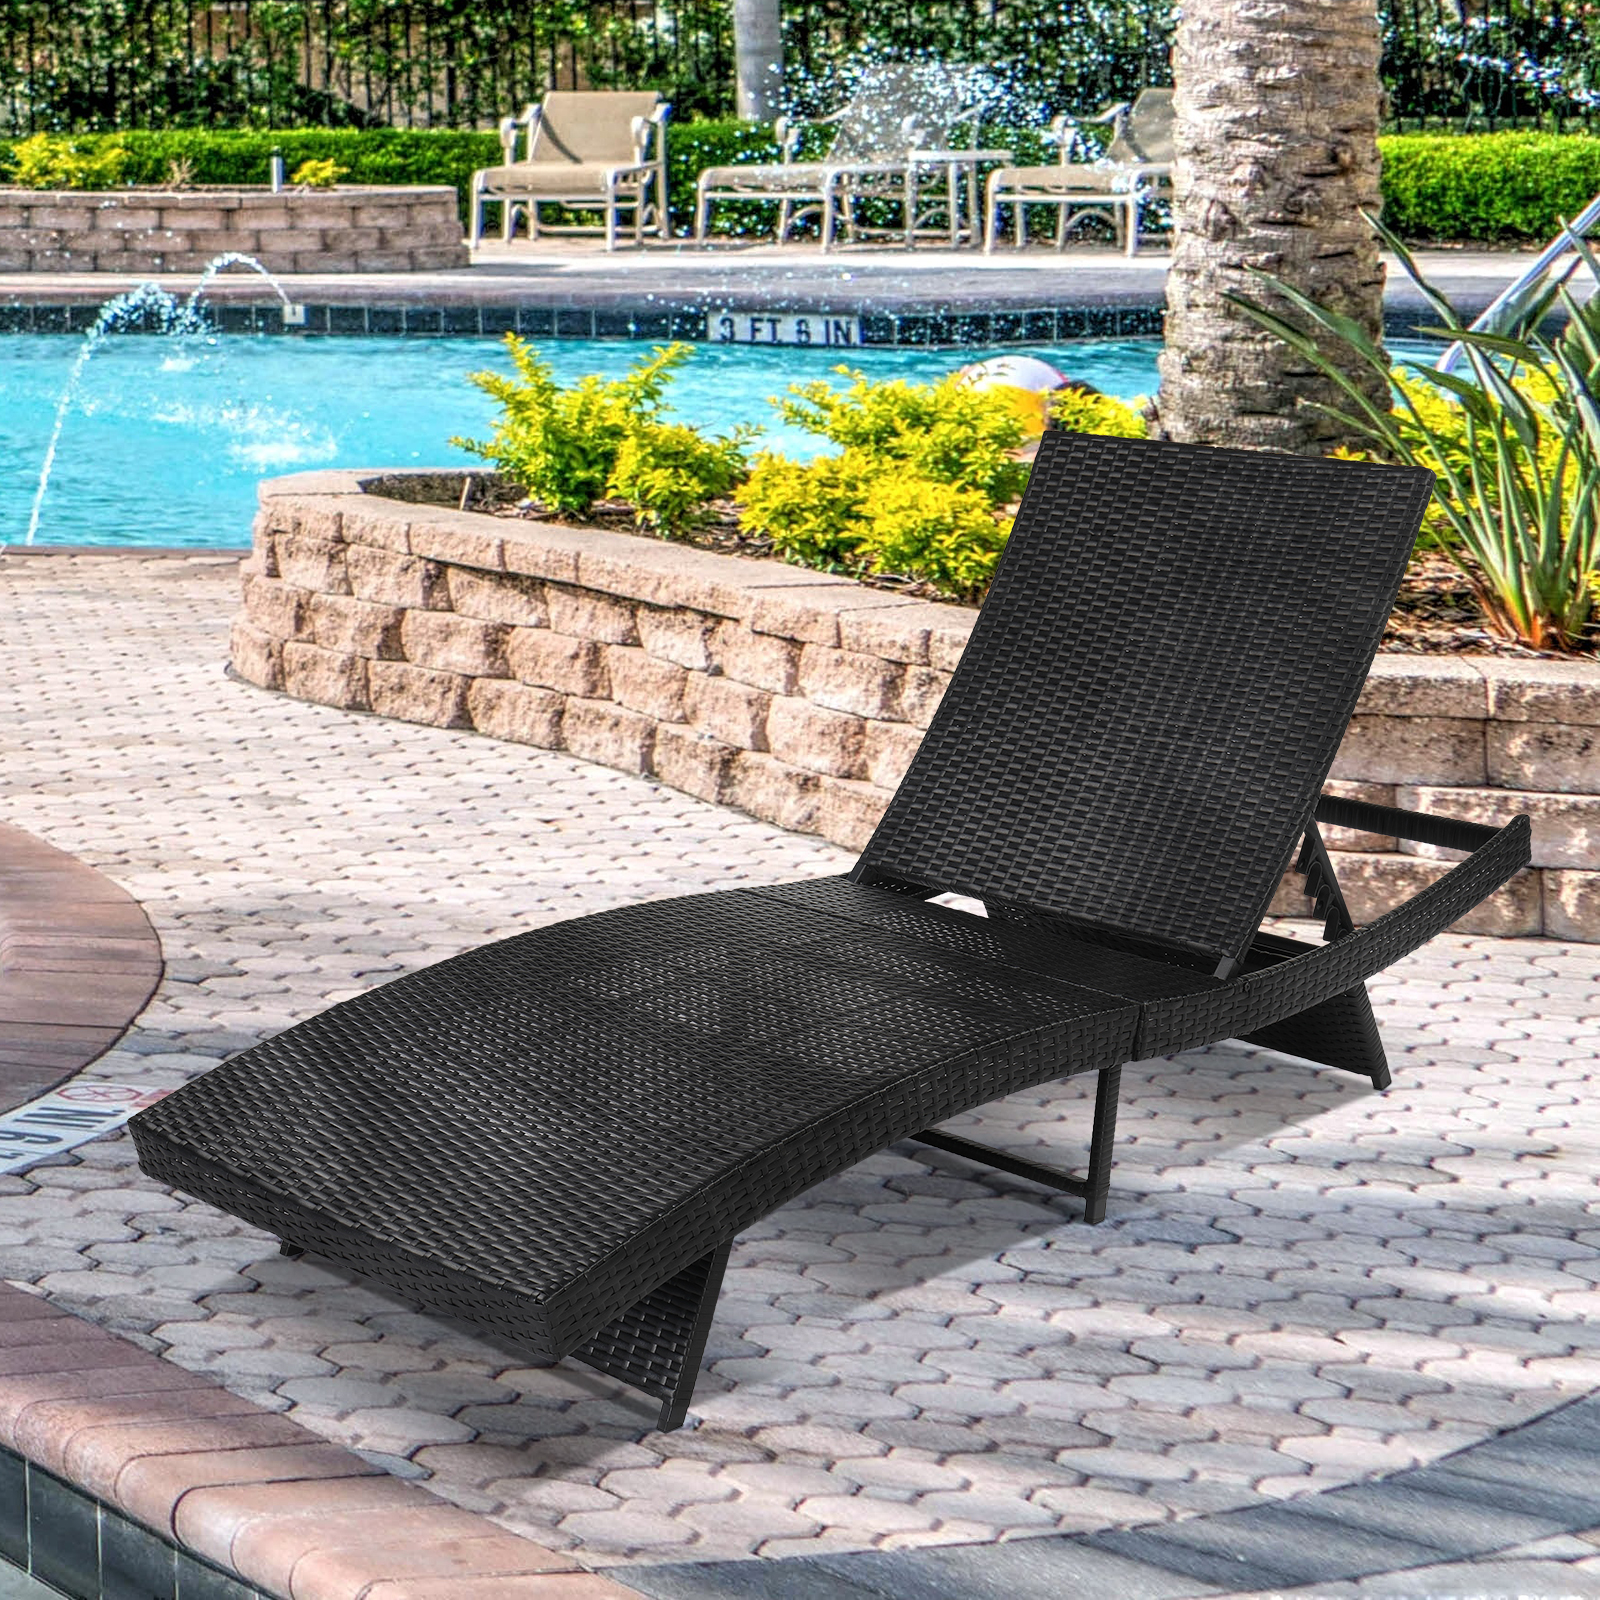 Outdoor Patio PE Wicker Chaise Lounge, 5-Position Adjustable Reclining Lounge Chair, Outdoor Sun Lounger with Removable Cushions for Patio Poolside Backyard Porch Garden, B32 - image 2 of 9